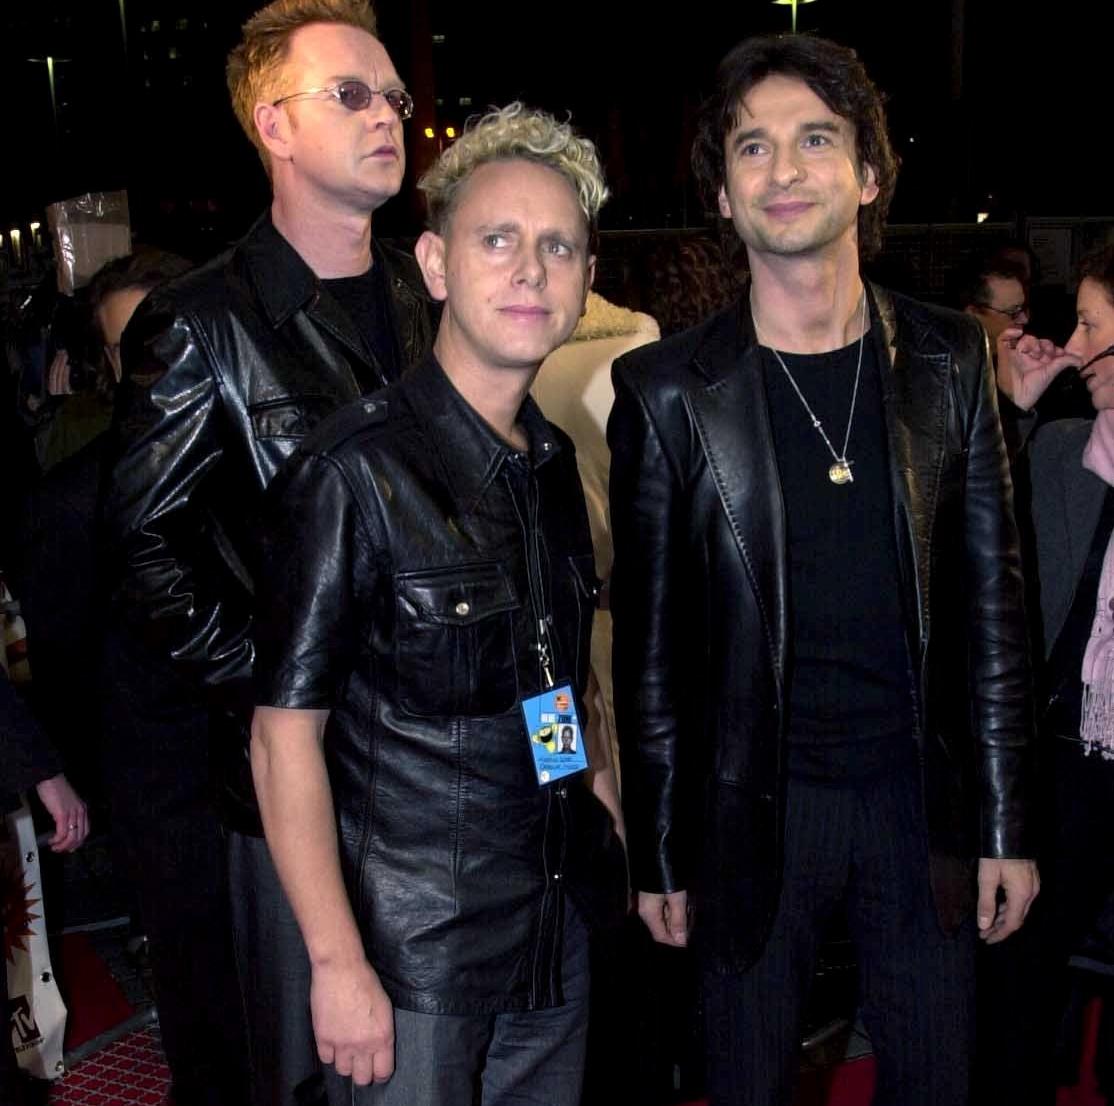 Andy Fletcher, Martin Gore and Dave Gahan 2001.